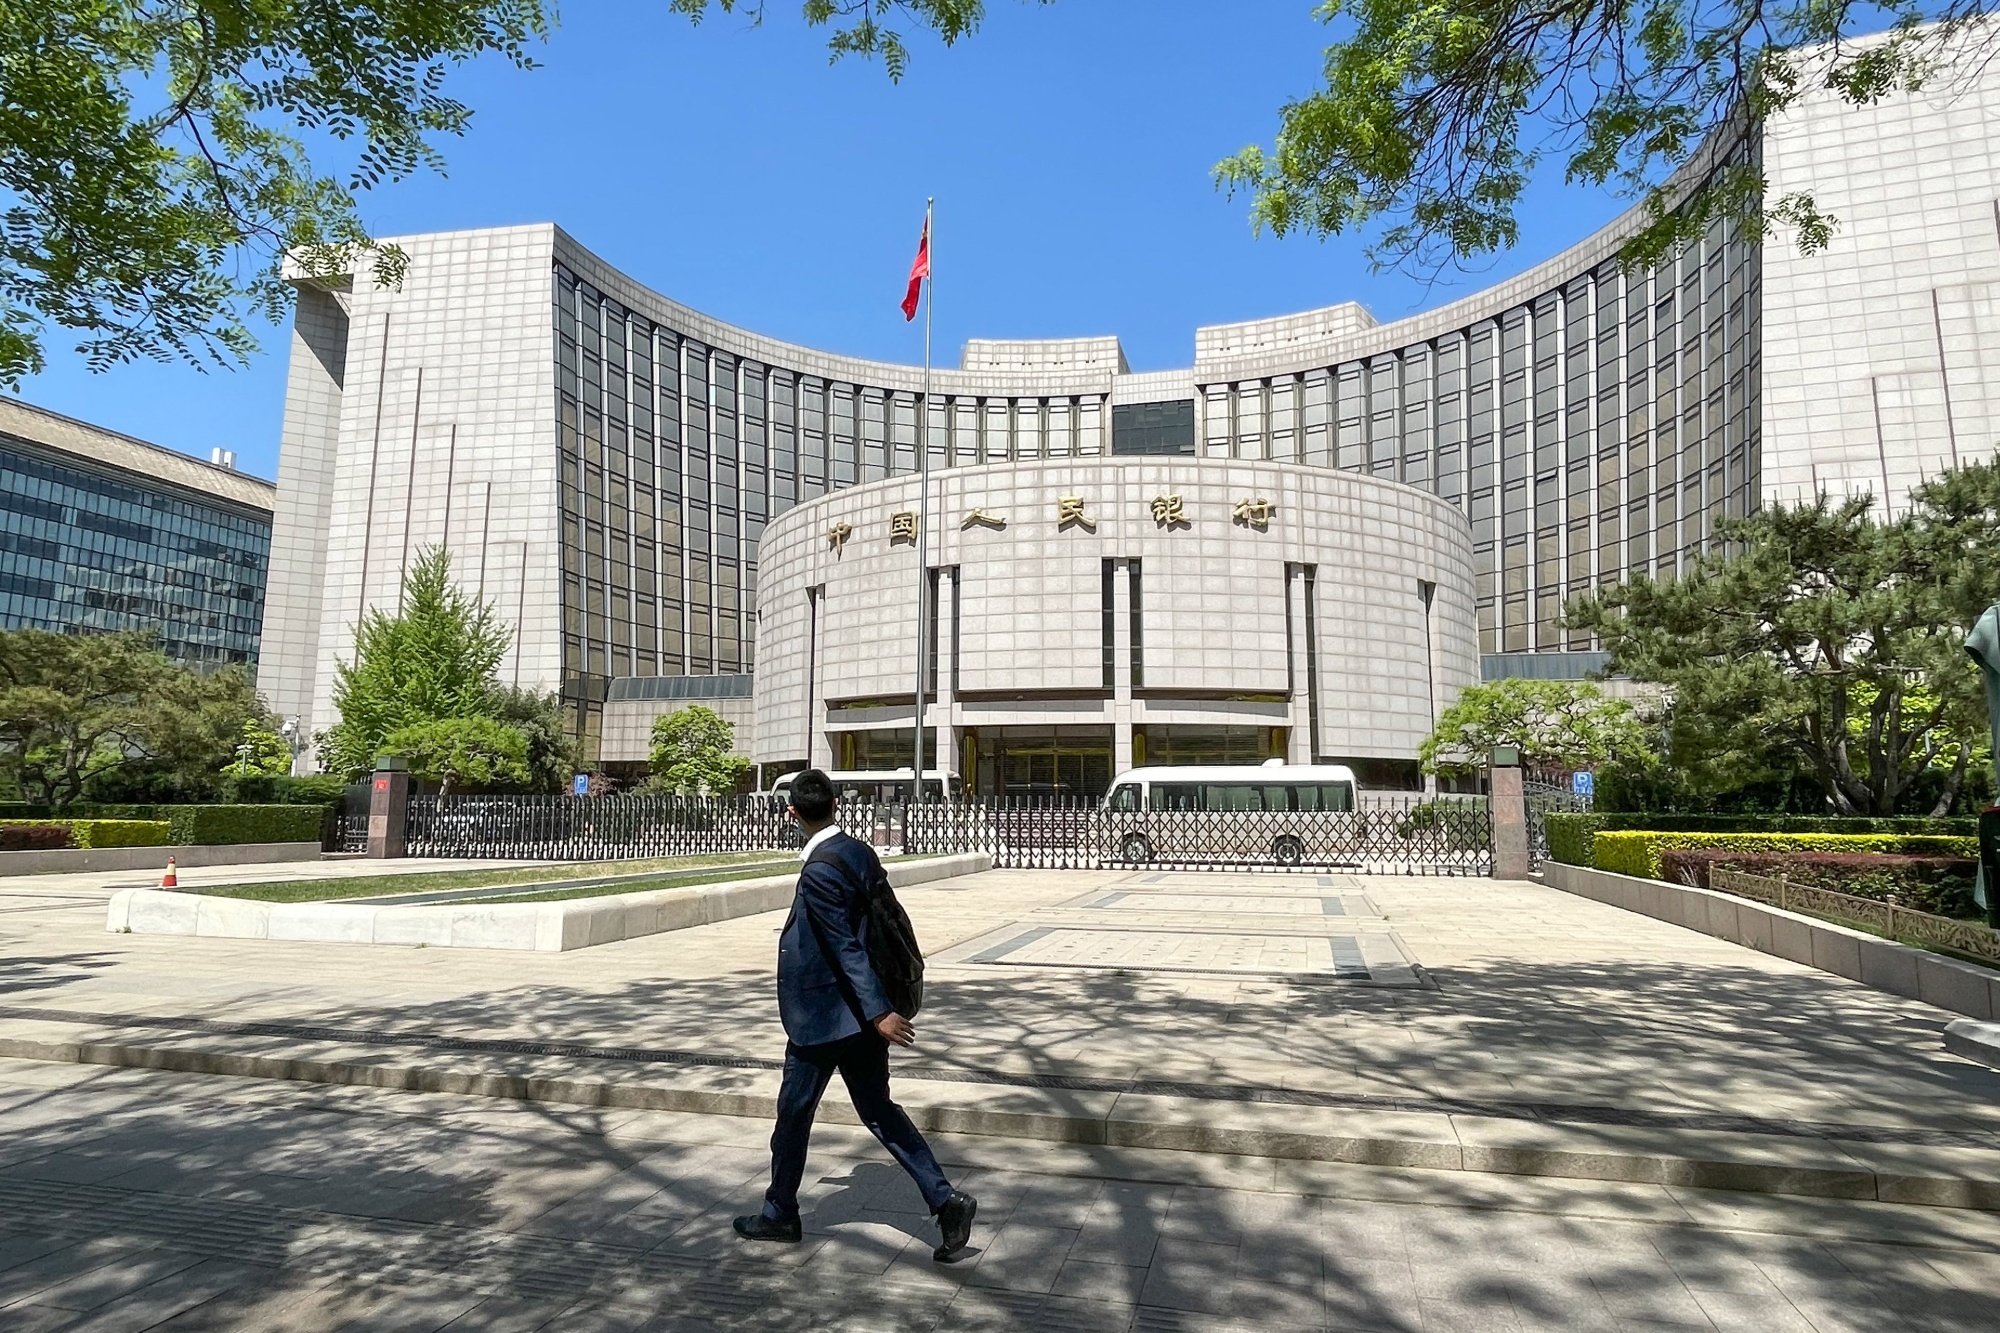 Officials have ramped up&nbsp;scrutiny&nbsp;of trading behavior, and warned some banks to&nbsp;limit their exposure&nbsp;to bonds amid financial-stability worries.